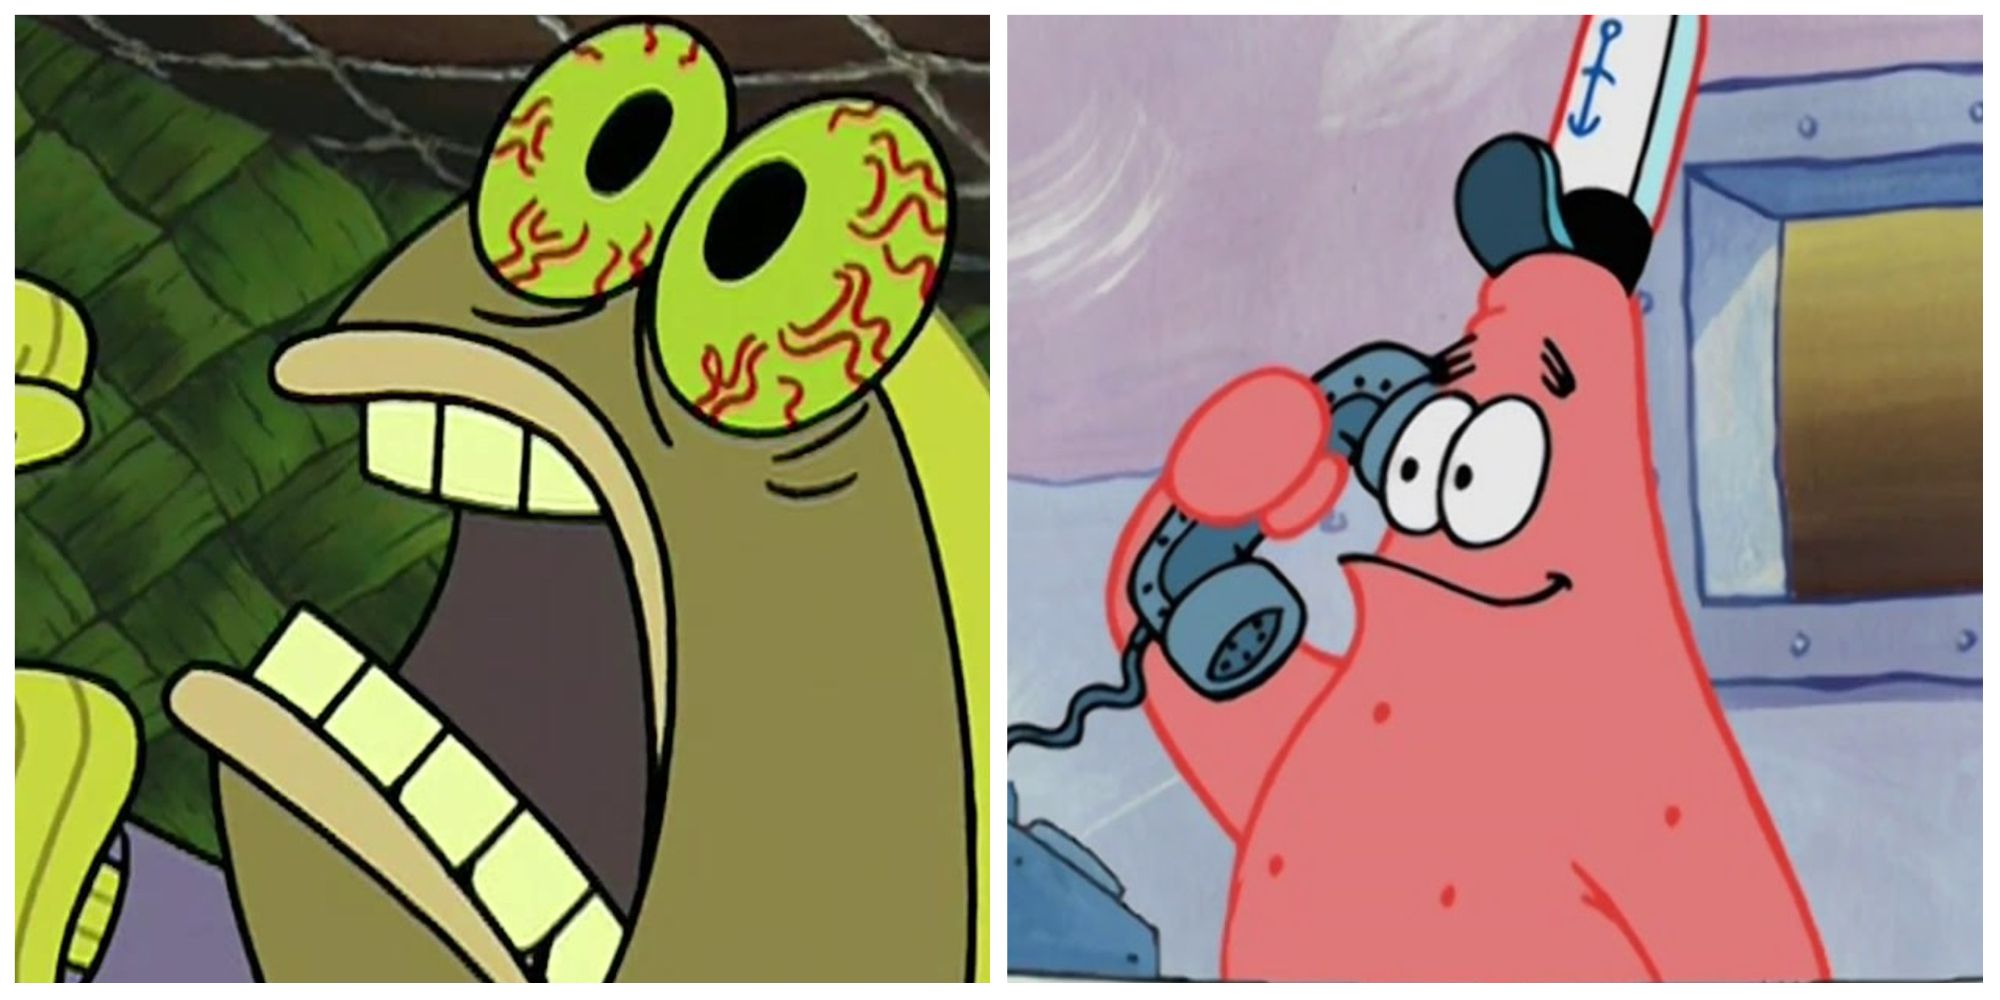 Left: Screaming Chocolate Guy. Right: Patrick answering phone at the Krusty Krab. Image sources: Encyclopedia SpongeBobia and YouTube.